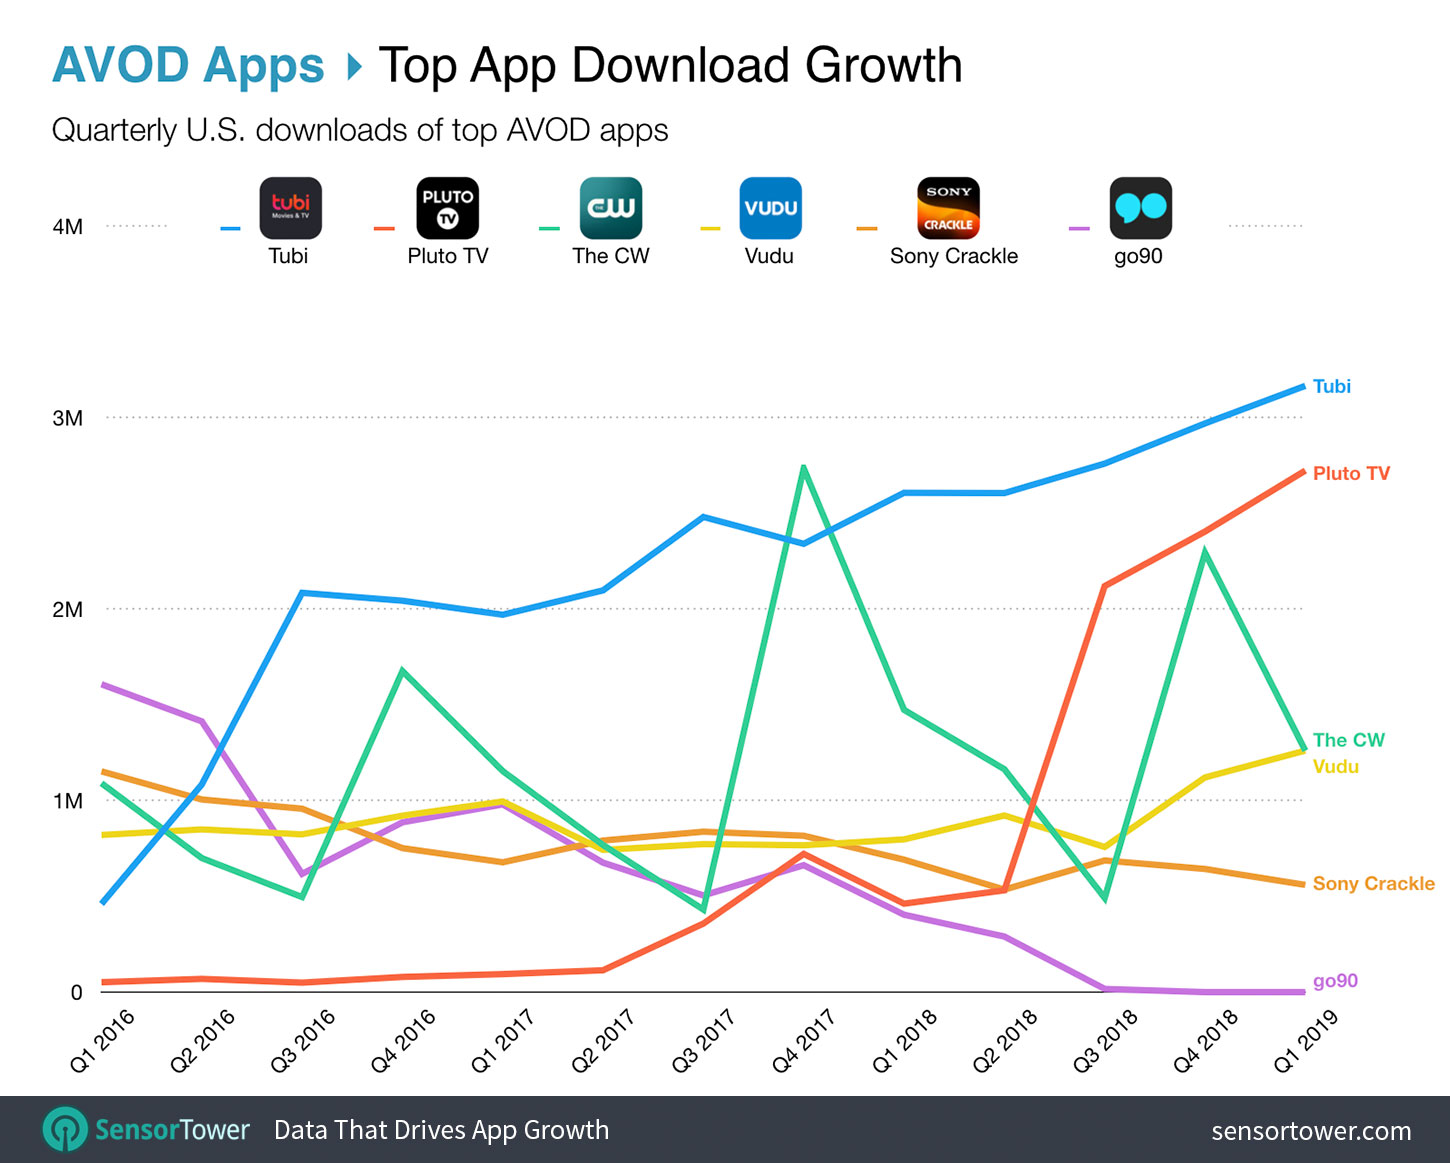 Top AVOD App Download Growth from Q1 2016 through Q1 2019 Chart